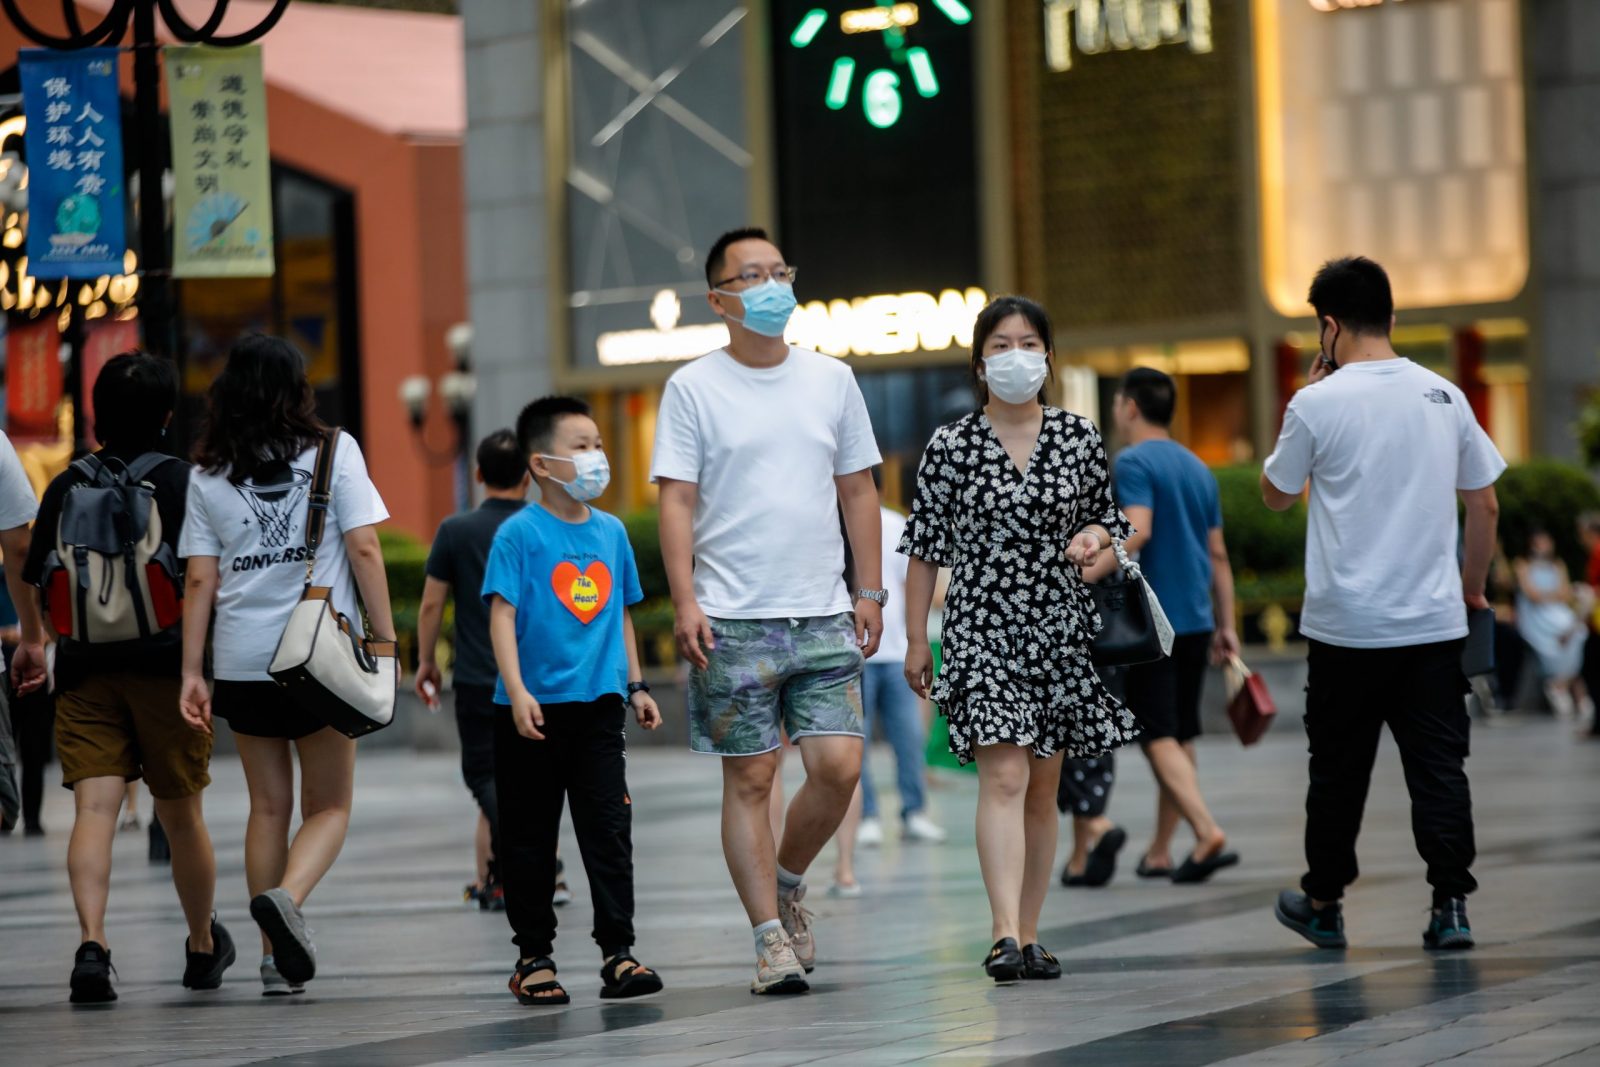 epa10146963 People wearing face masks walk around Jiefangbei pedestrian street in Chongqing, China, 30 August 2022. Local authorities implemented tighter COVID-19 restrictions after 11 cases were detected in Chongqing, by imposing mass testing and establishing temporary control areas.  EPA/WU HAO